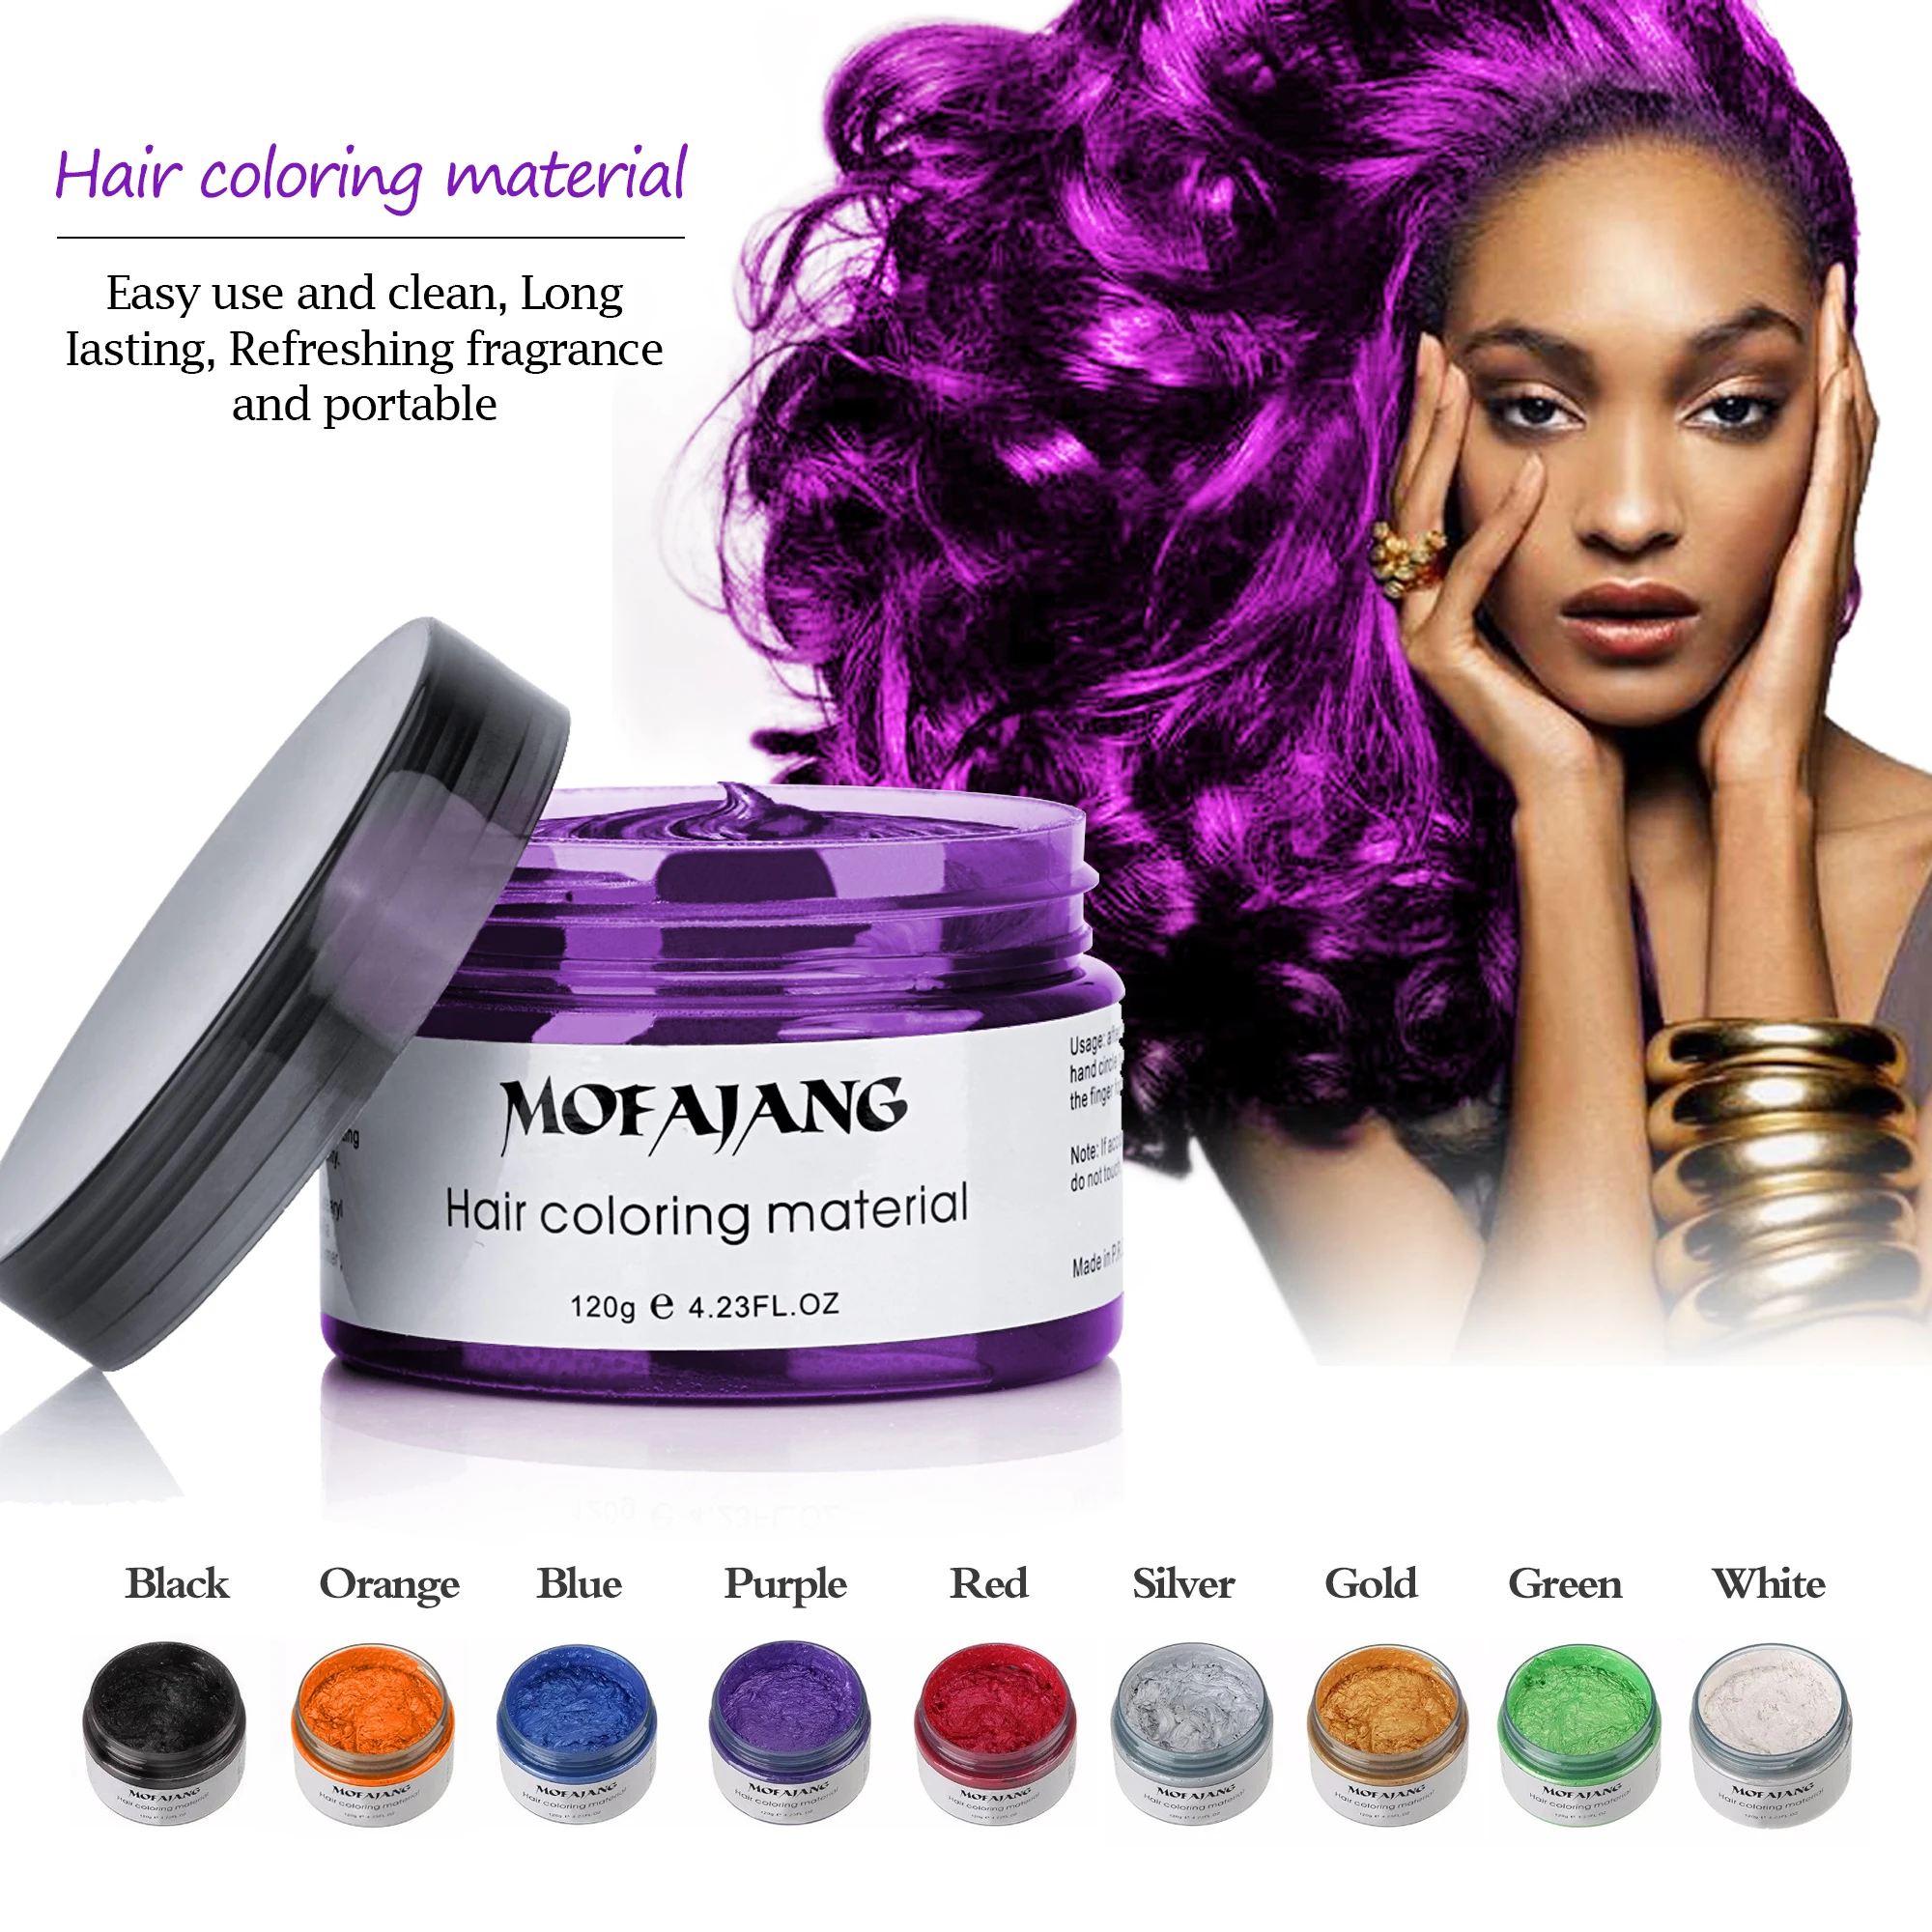 Mofajang 9 Colors Private Label Hair Styling Pomade Material Temporary  Disposable Mud Hair Color Wax - Buy Hair Color Wax,Private Label Hair Wax, Hair Coloring Material Product on 